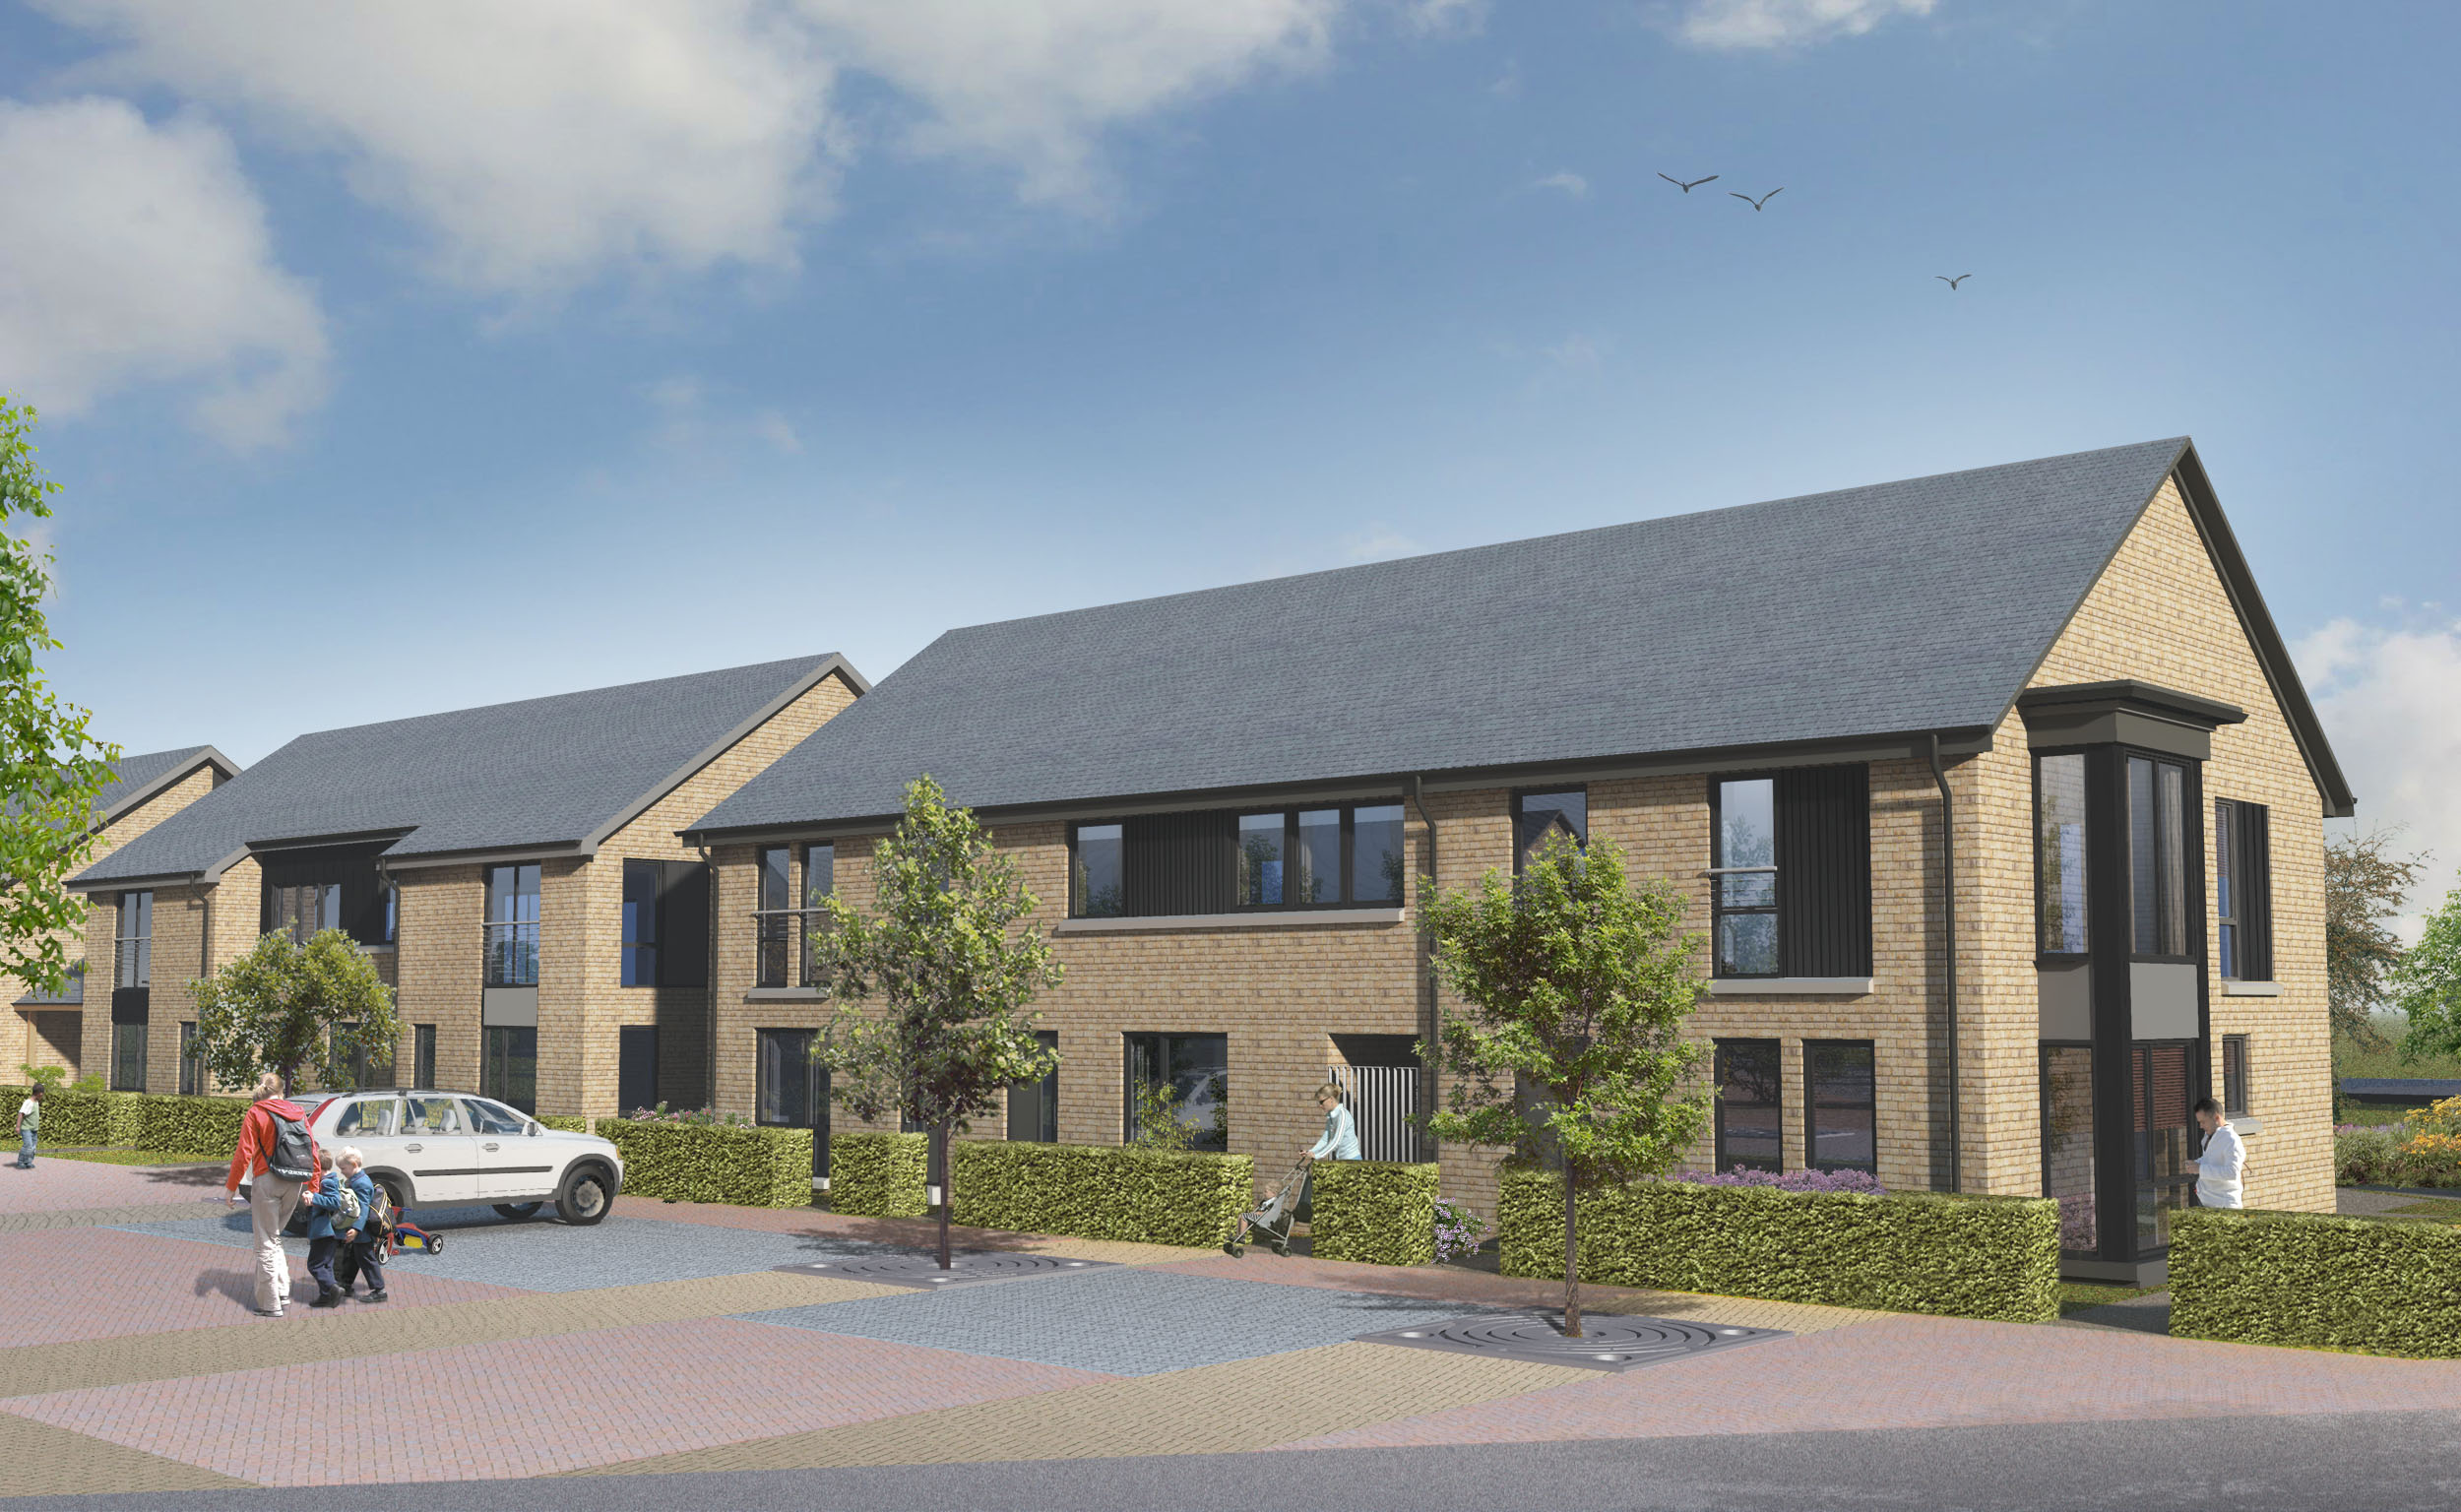 Works starts on new homes on south side | Wheatley Group